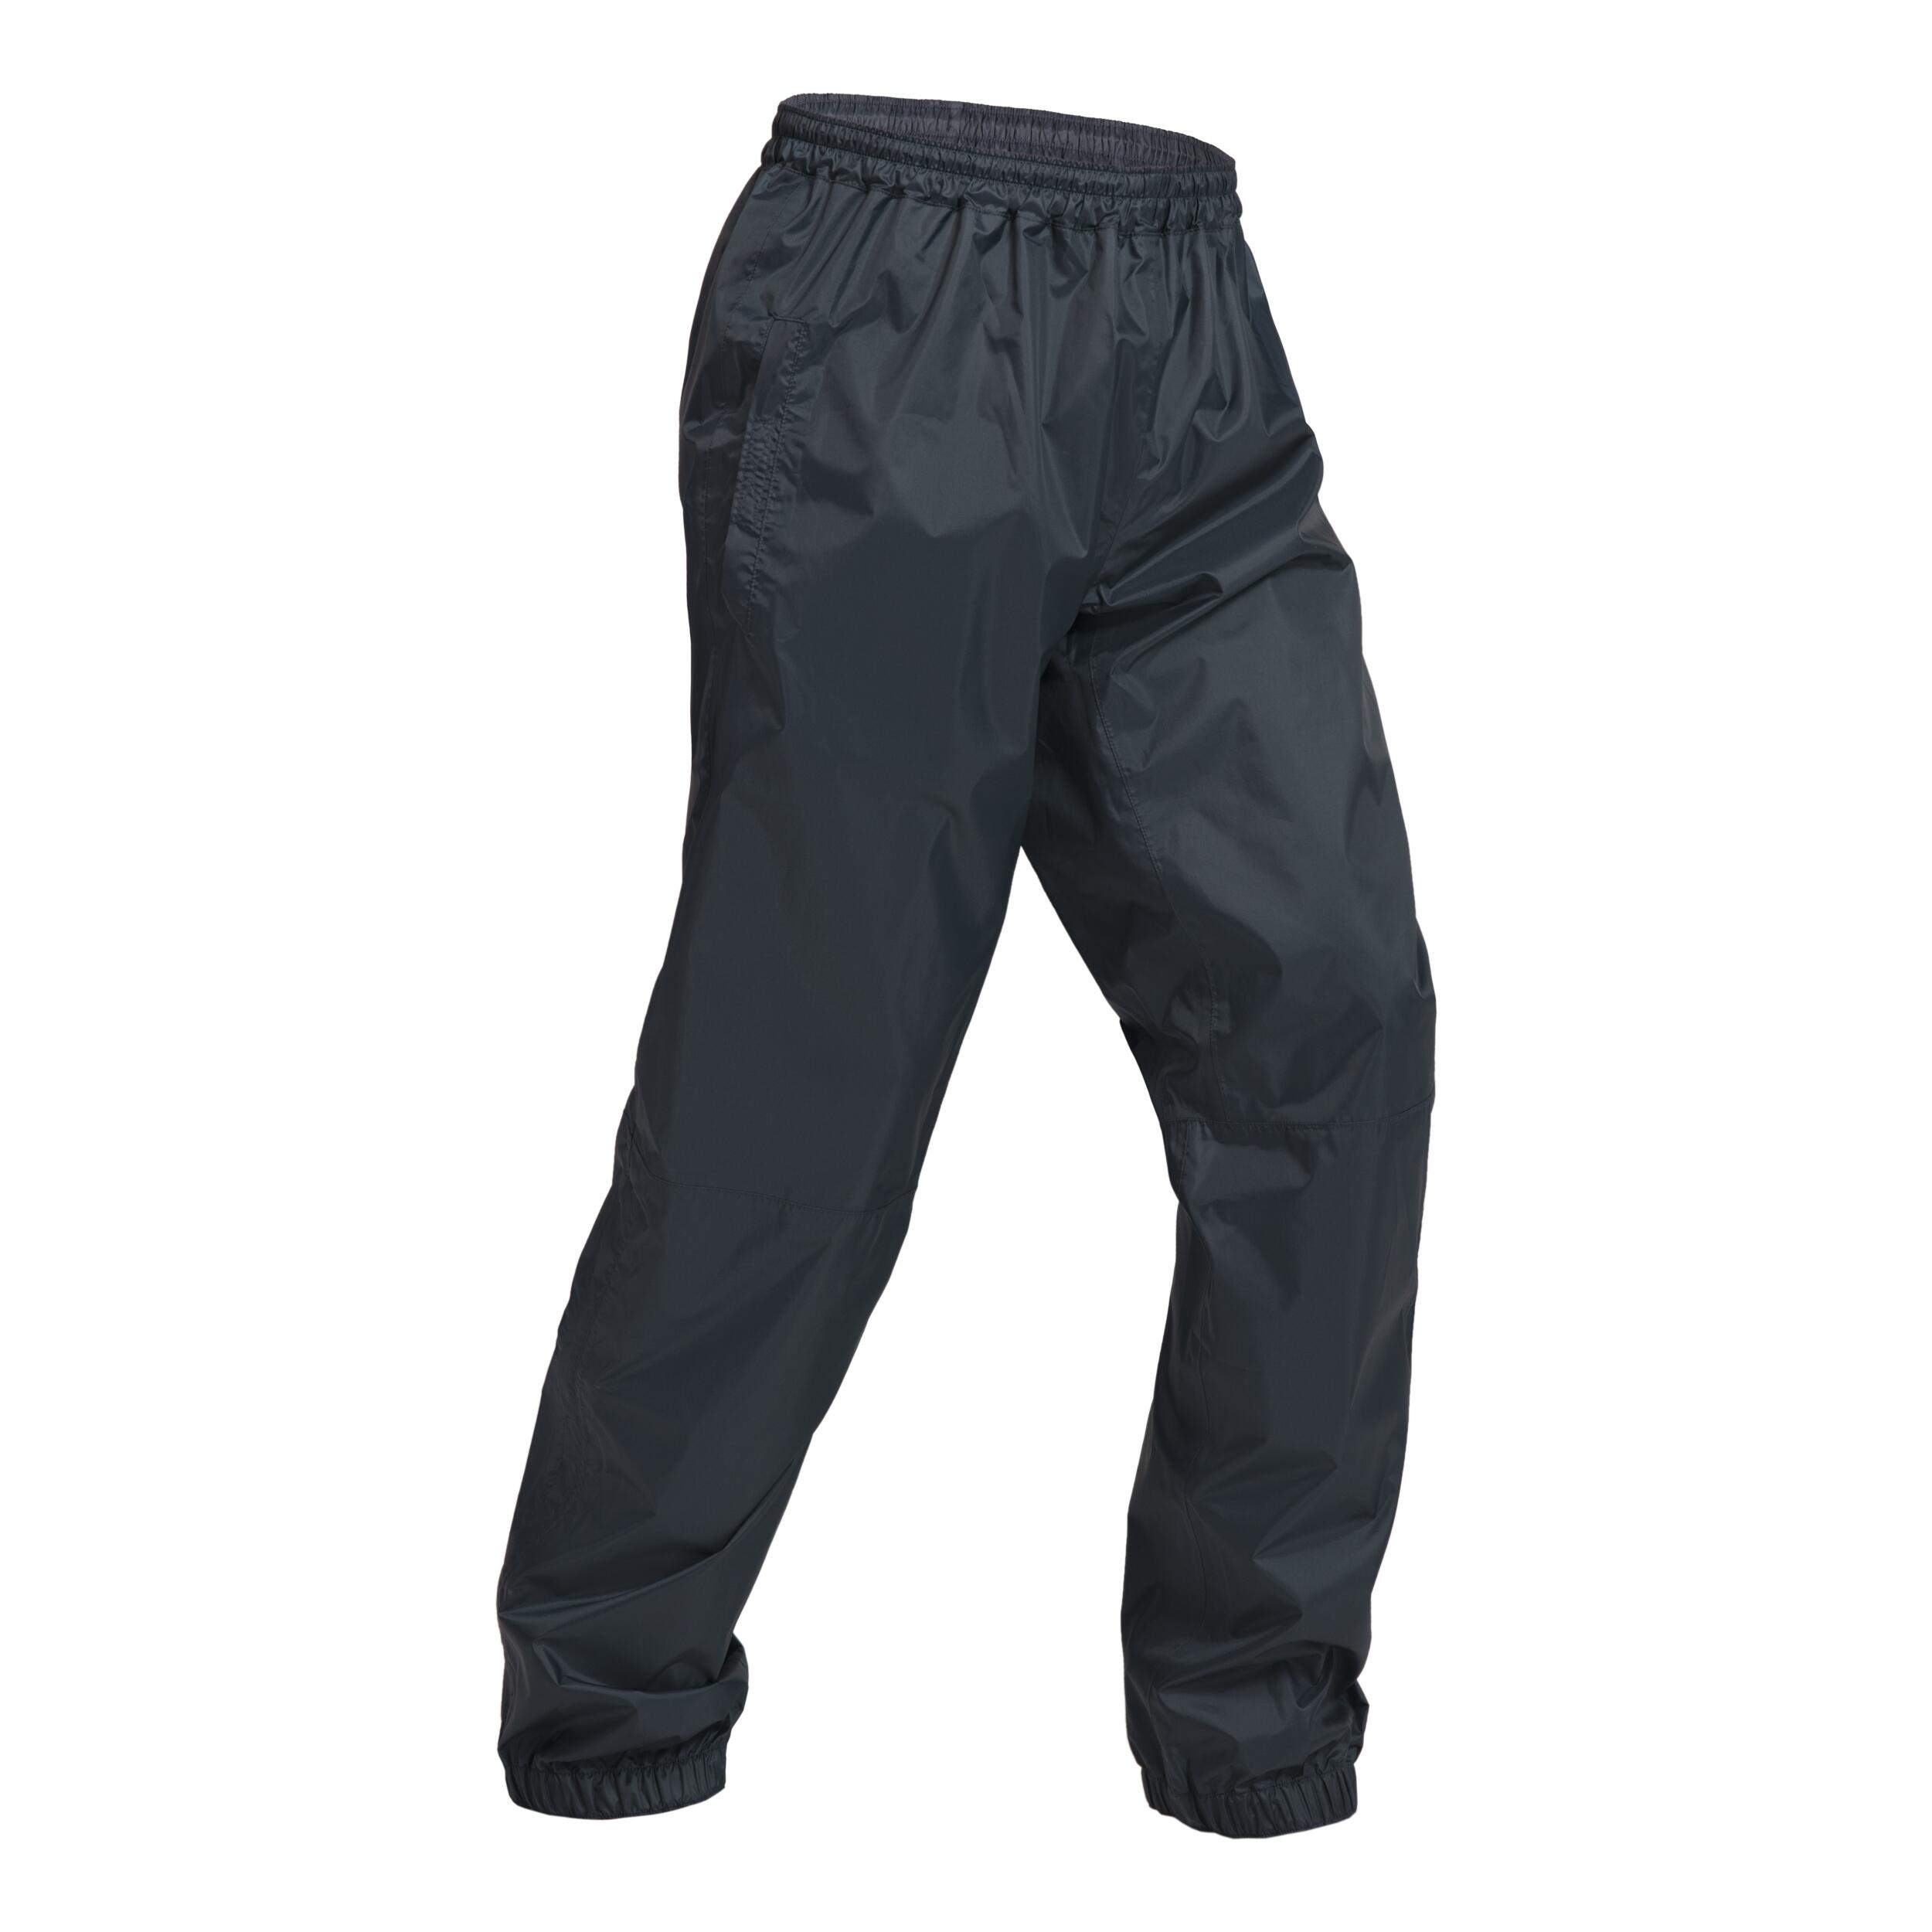 RECON GS2 Tactical Waterproof Light weight Flexible Utility Pants - Kit Bag  Perth